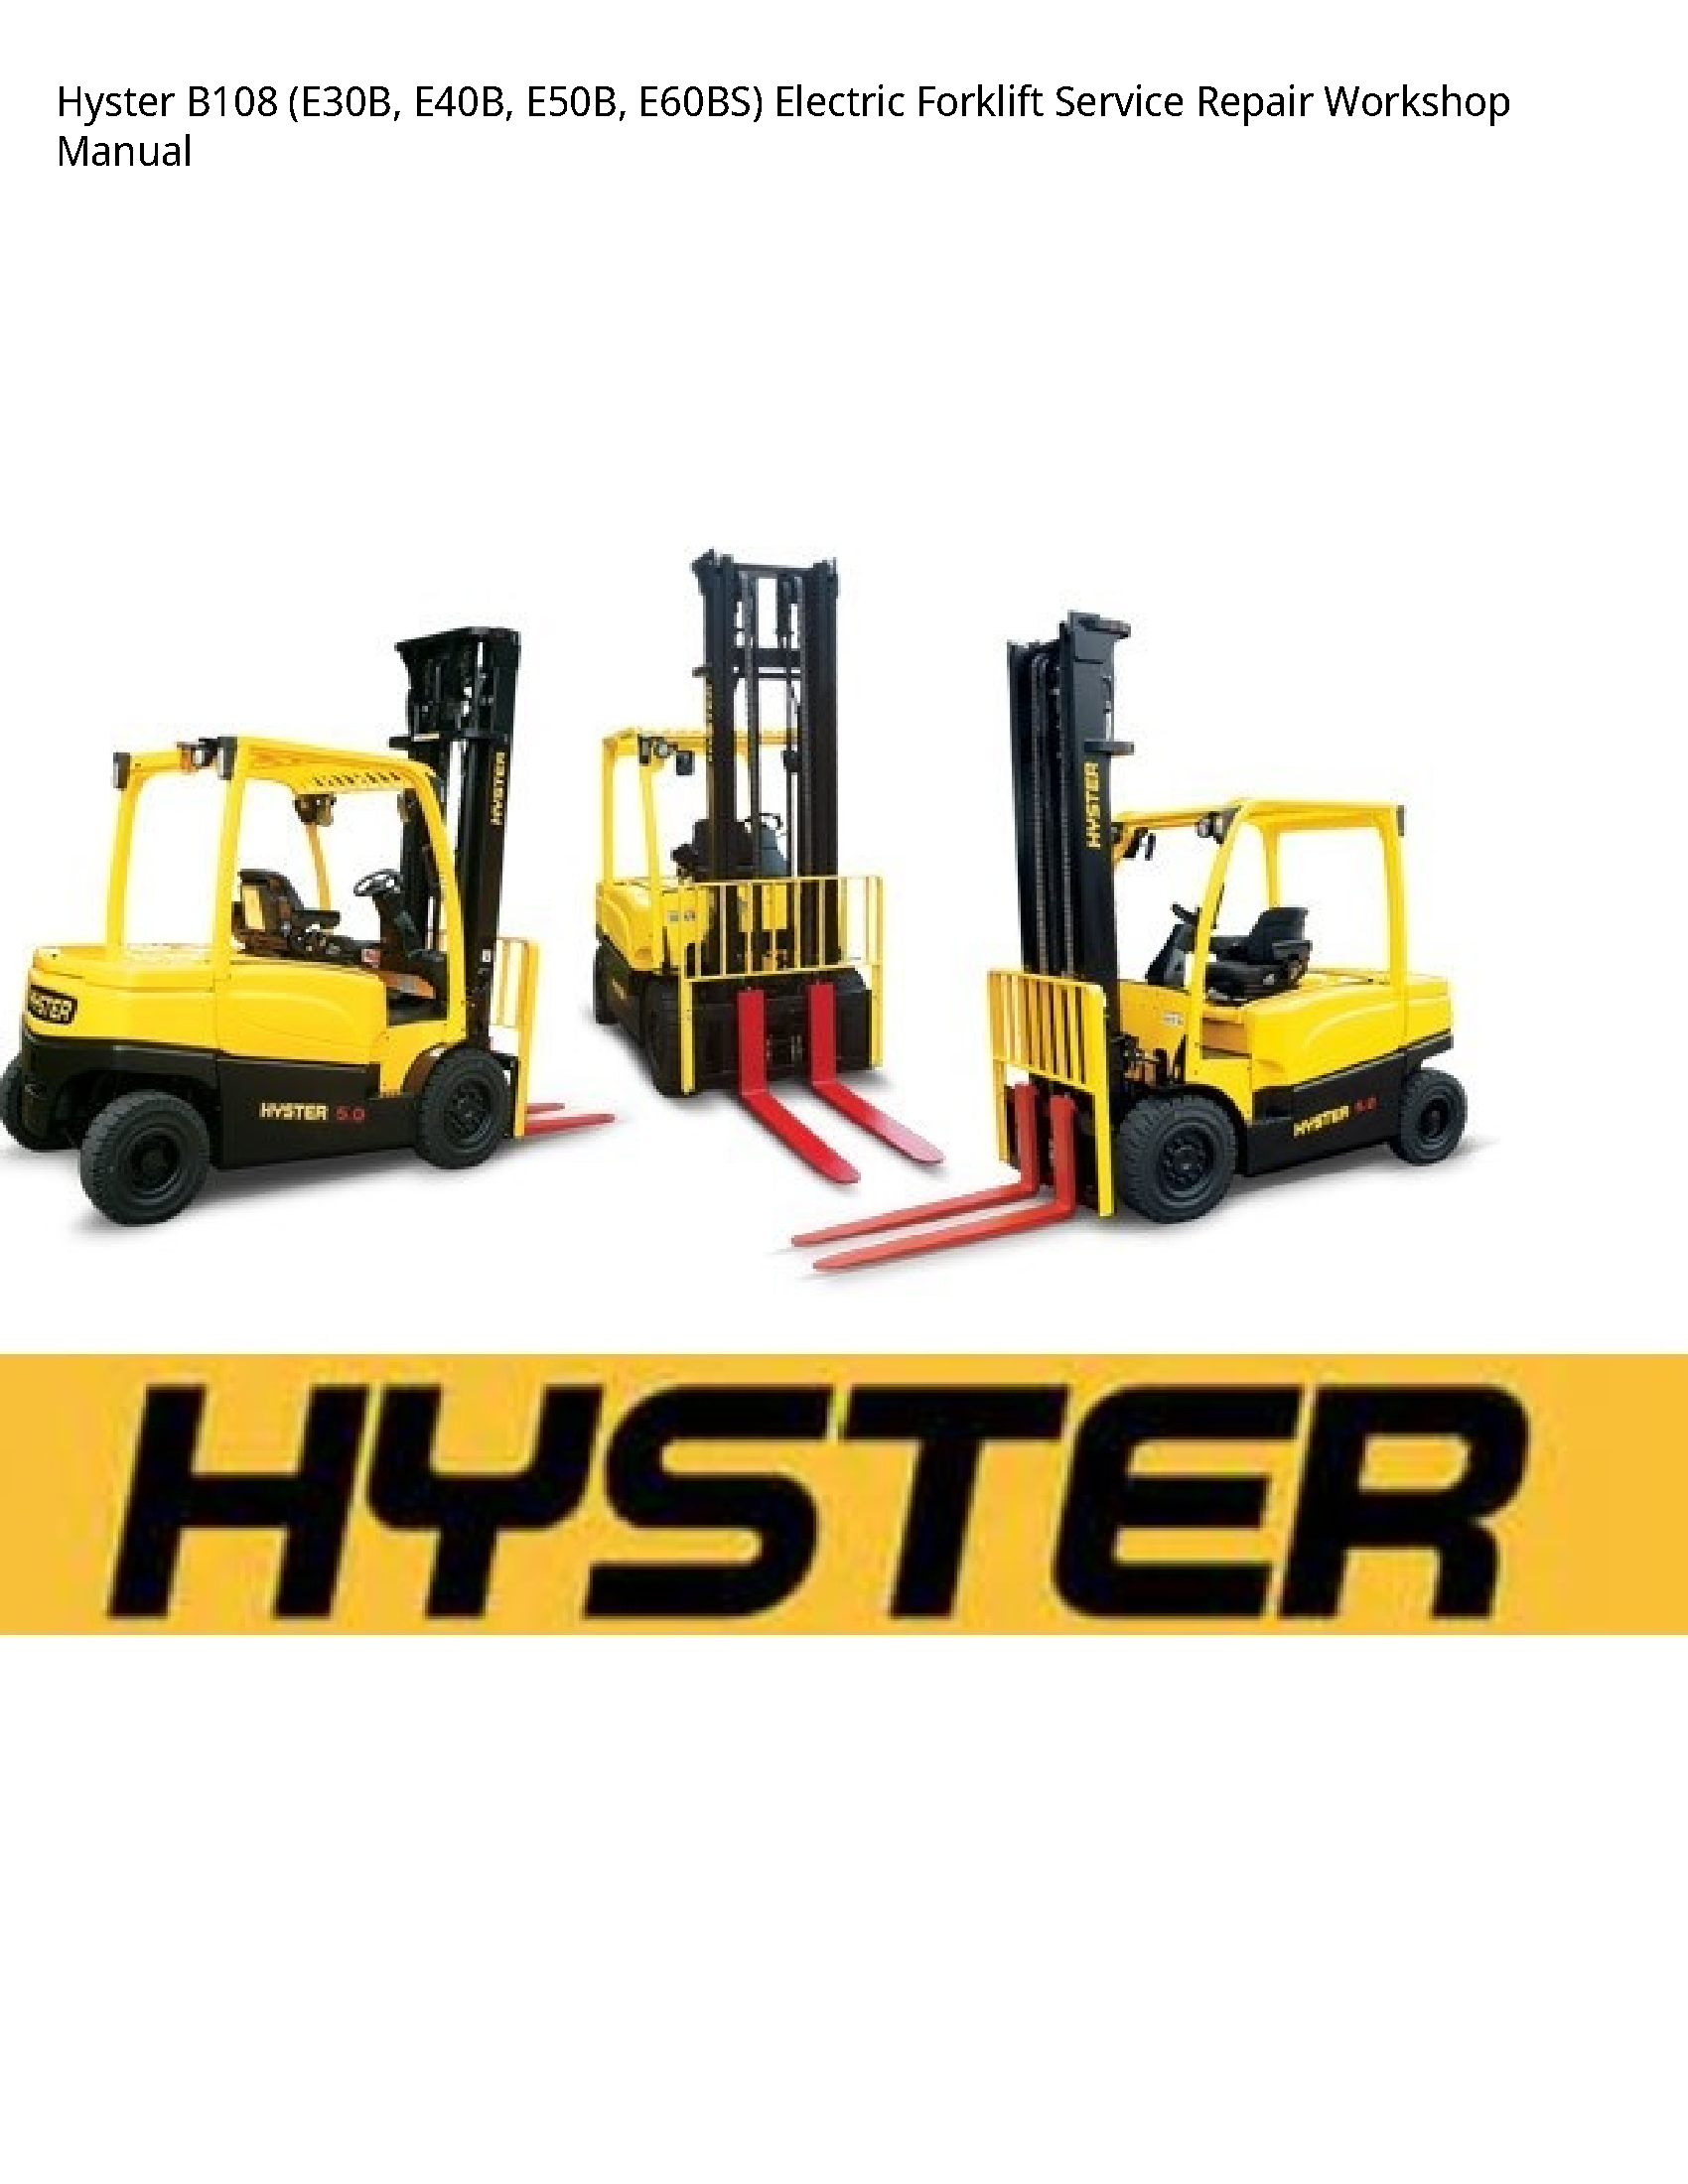 Hyster B108 Electric Forklift manual